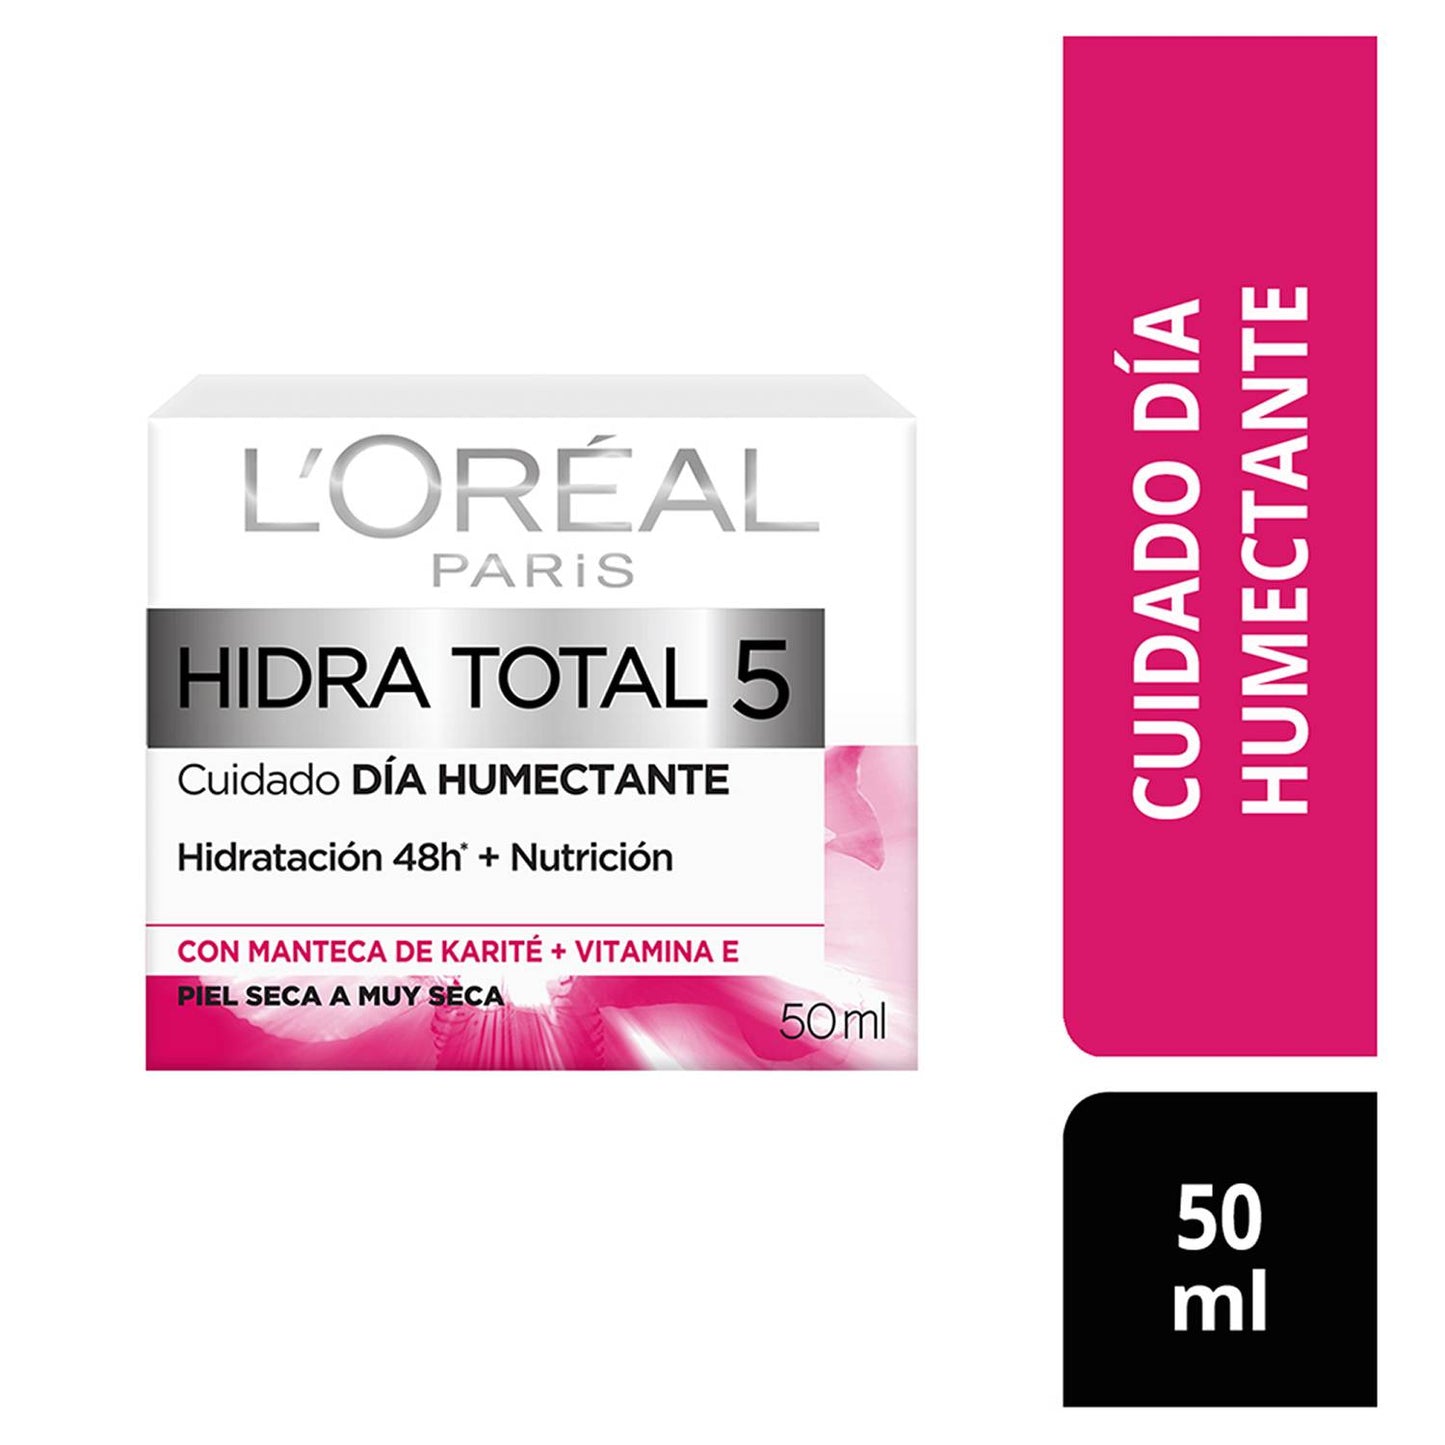 L'oreal Hidratotal 5 Día humectante 48h